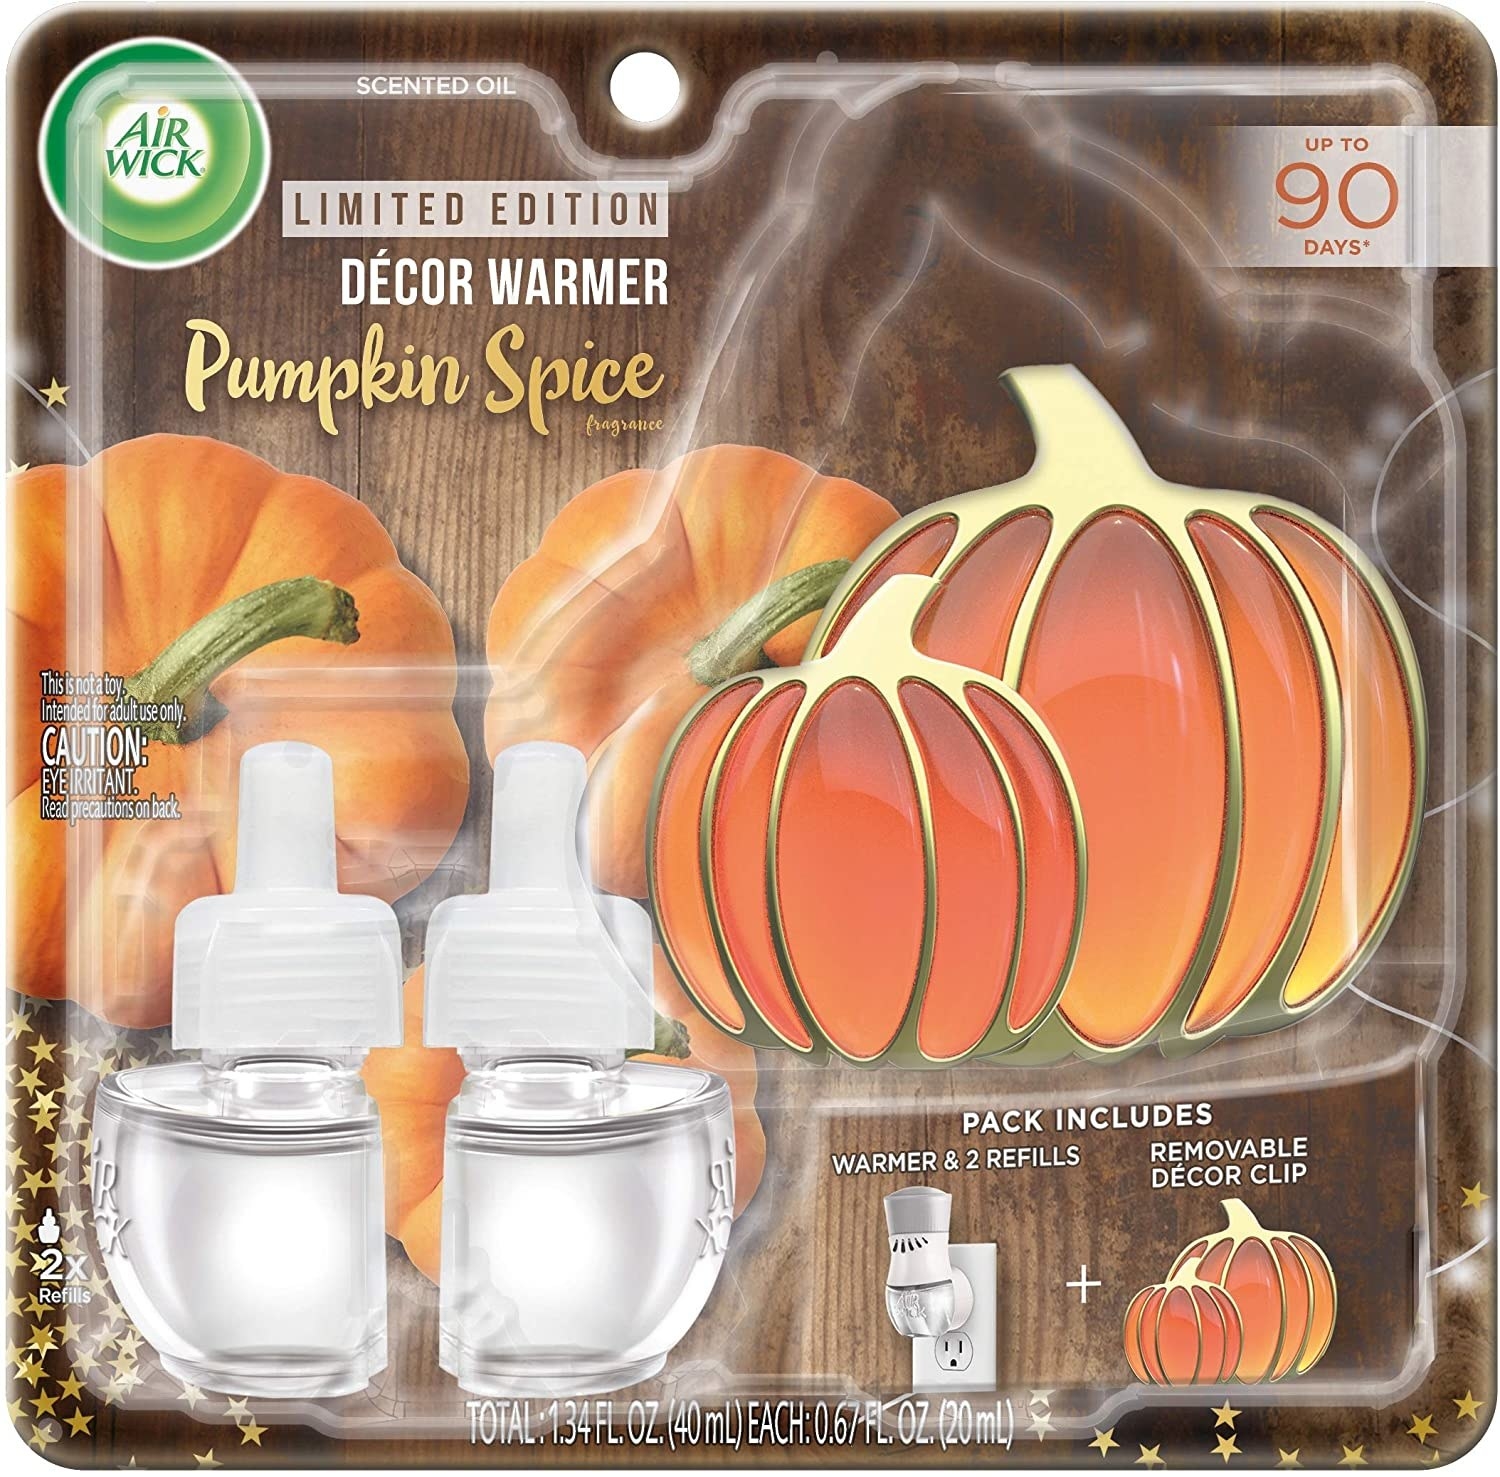 The contents of the pumpkin-shaped decor warmer set in packaging